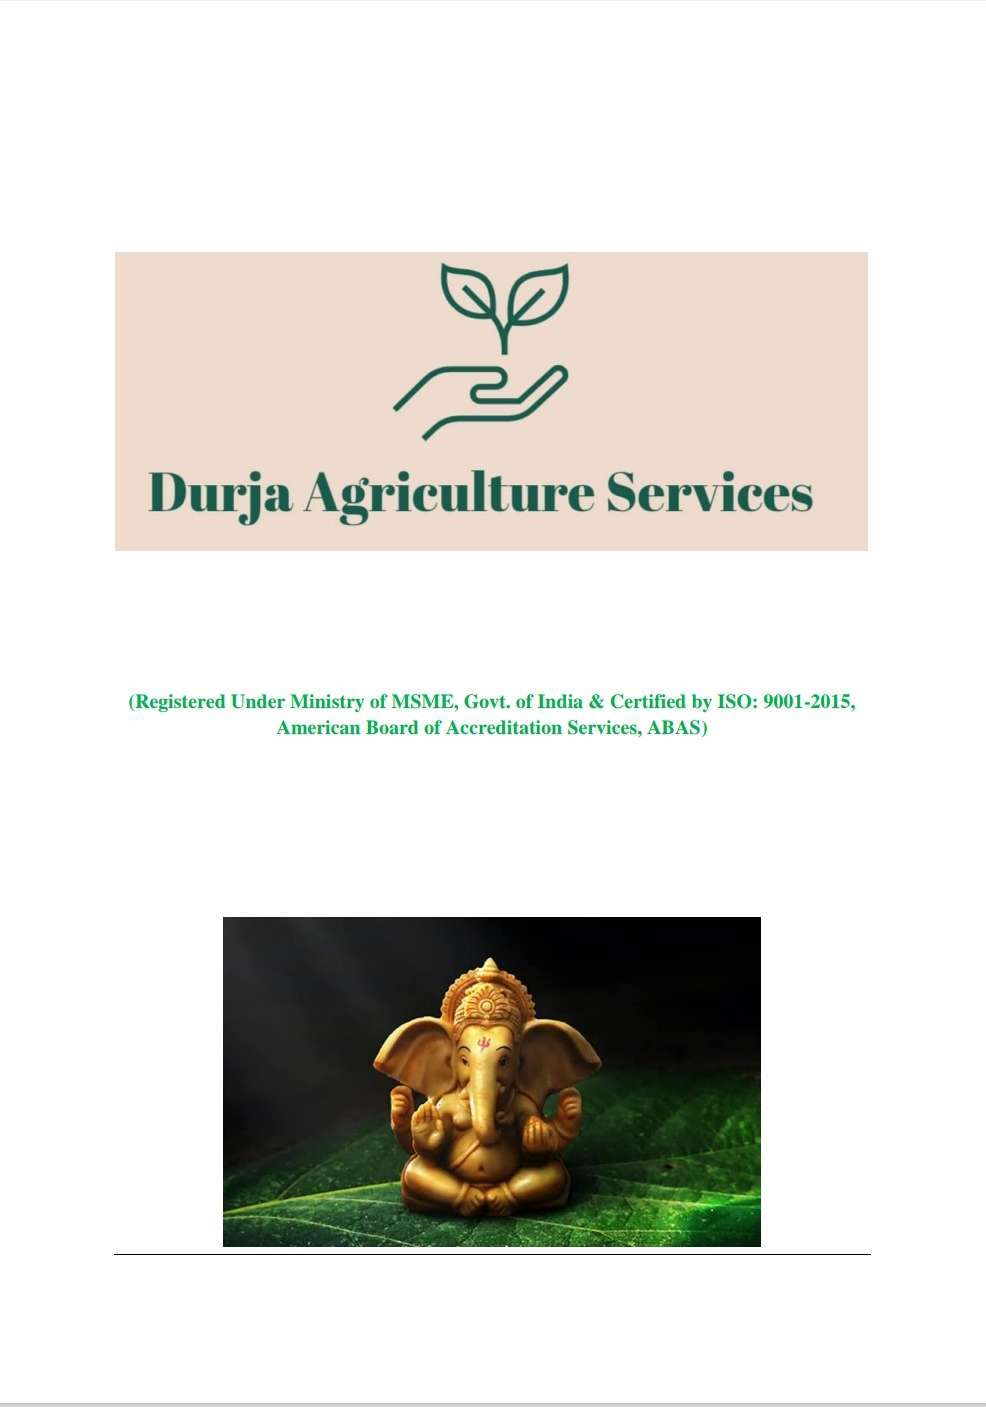 Durja Agriculture Services